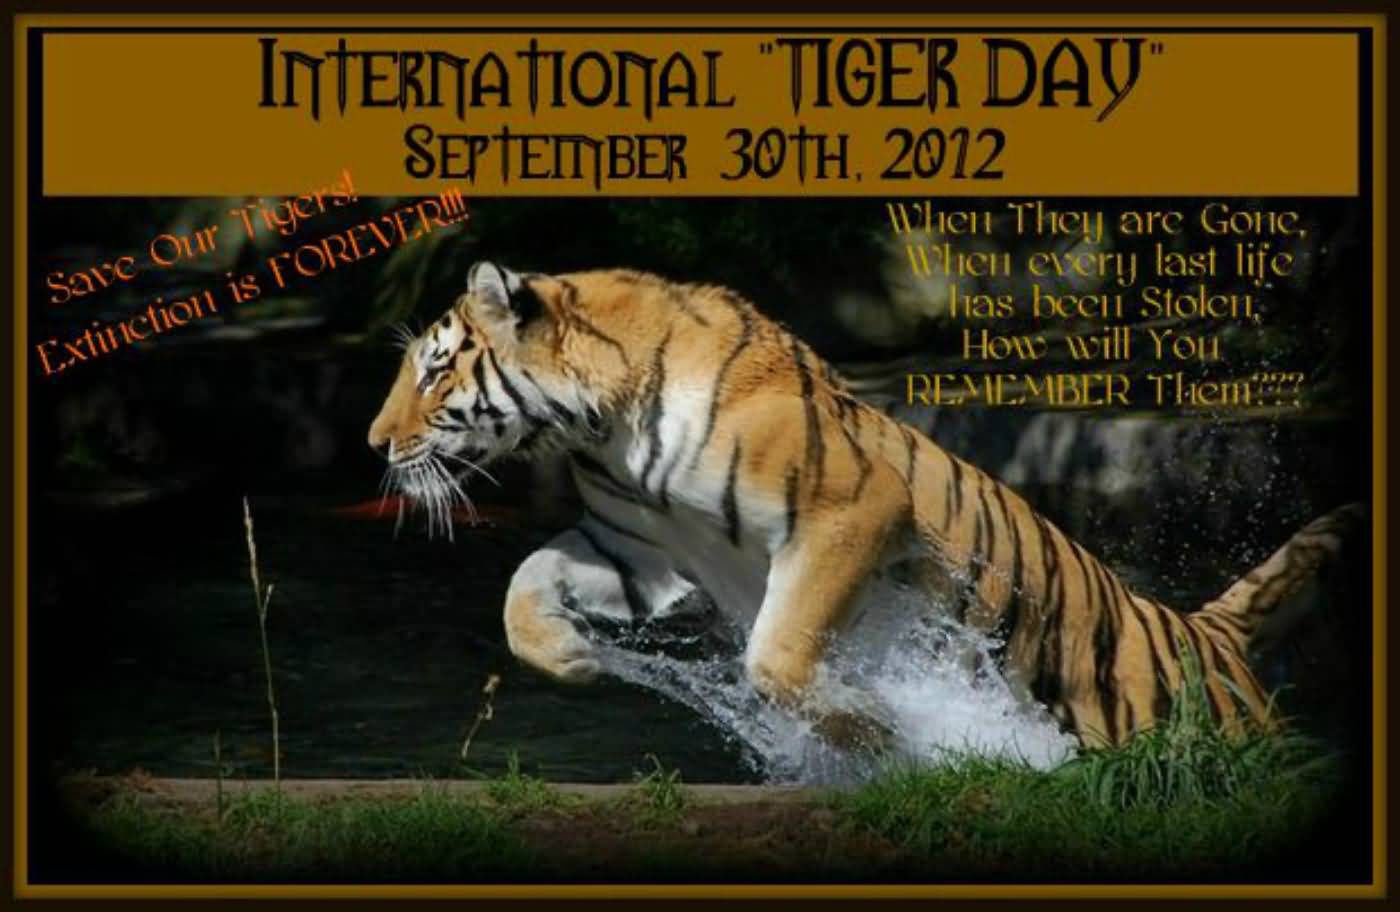 Save Our Tigers – International Tiger Day Greetings